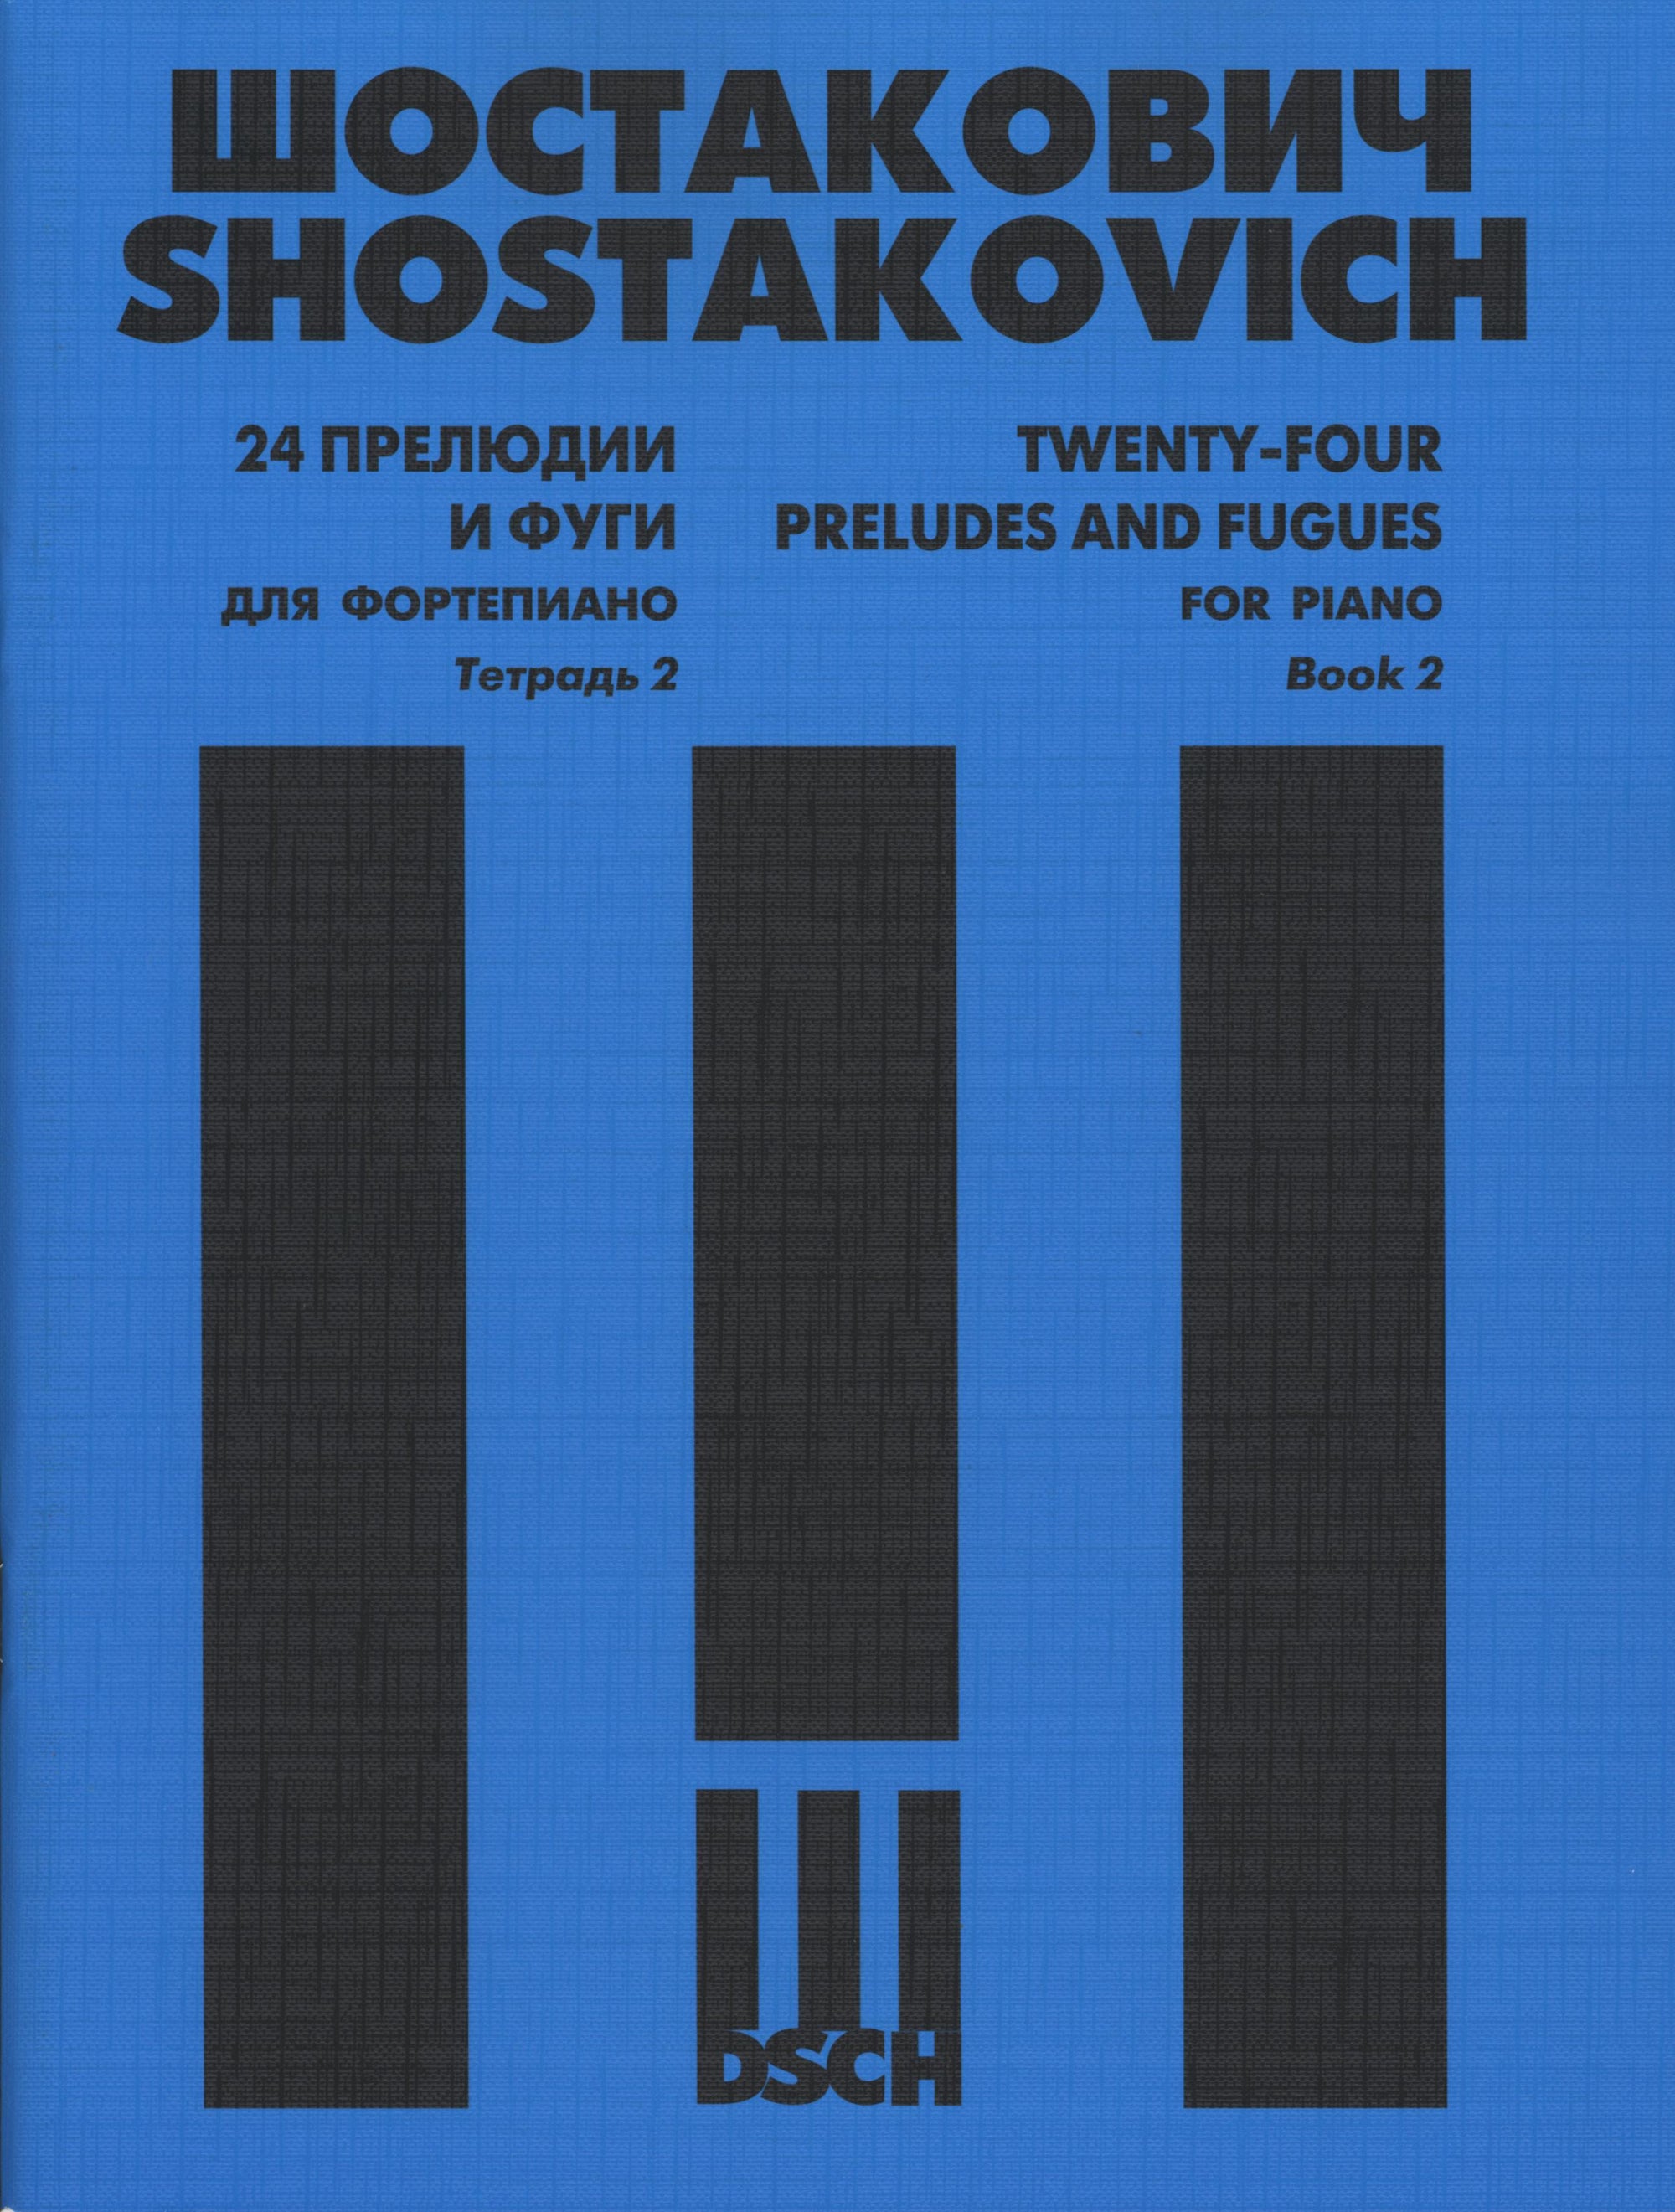 Shostakovich: 24 Preludes and Fugues, Op. 87 - Book 2 (Nos. 7-12)